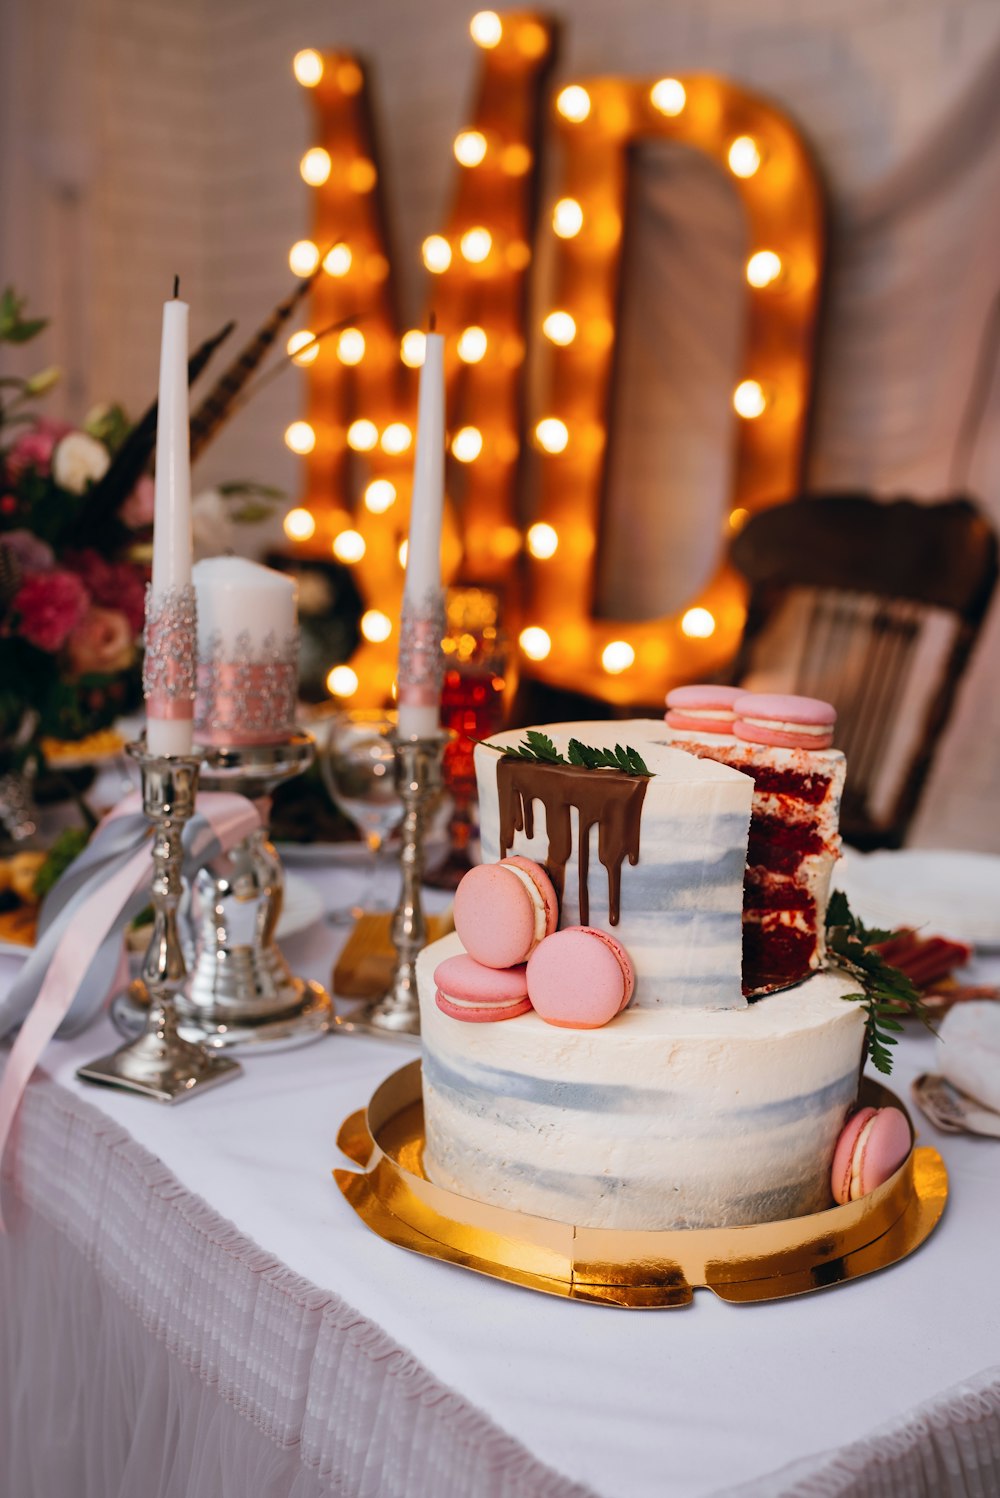 2-tier cake on table beside candles